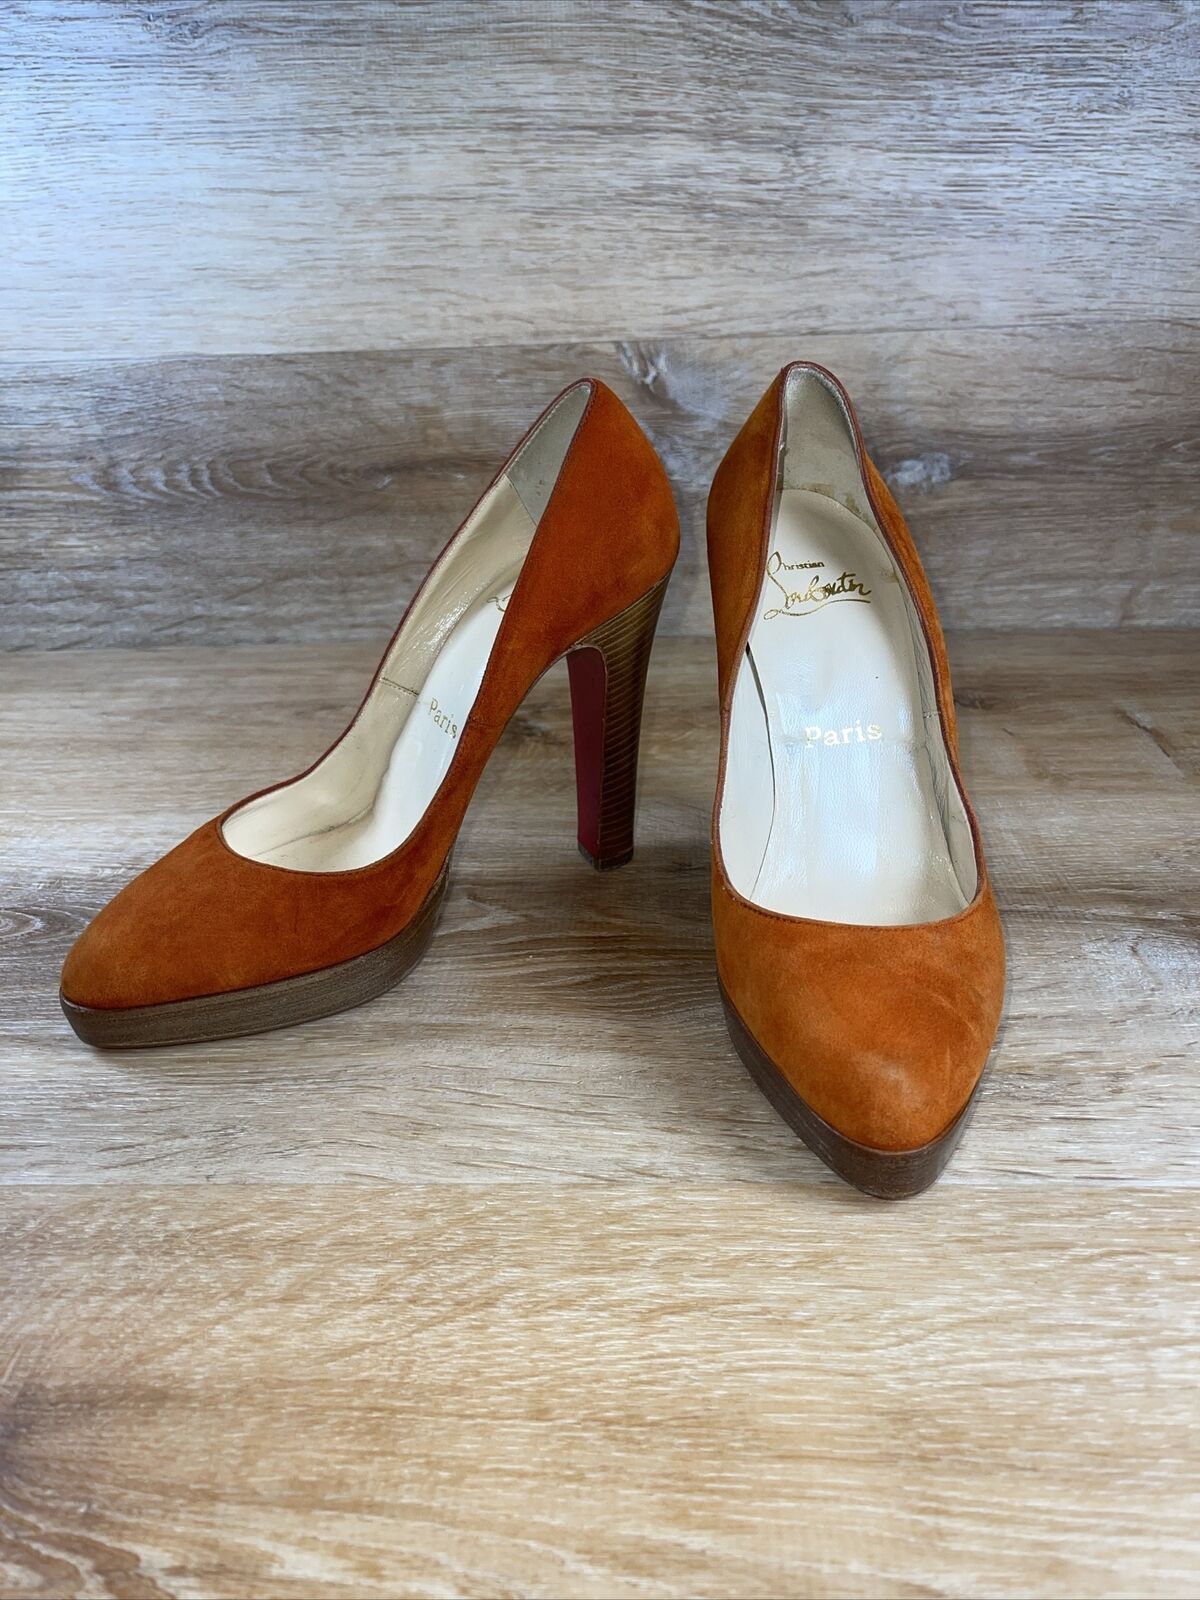 Authenticated Christian Louboutin Rust Suede Heels Shoes 38.5